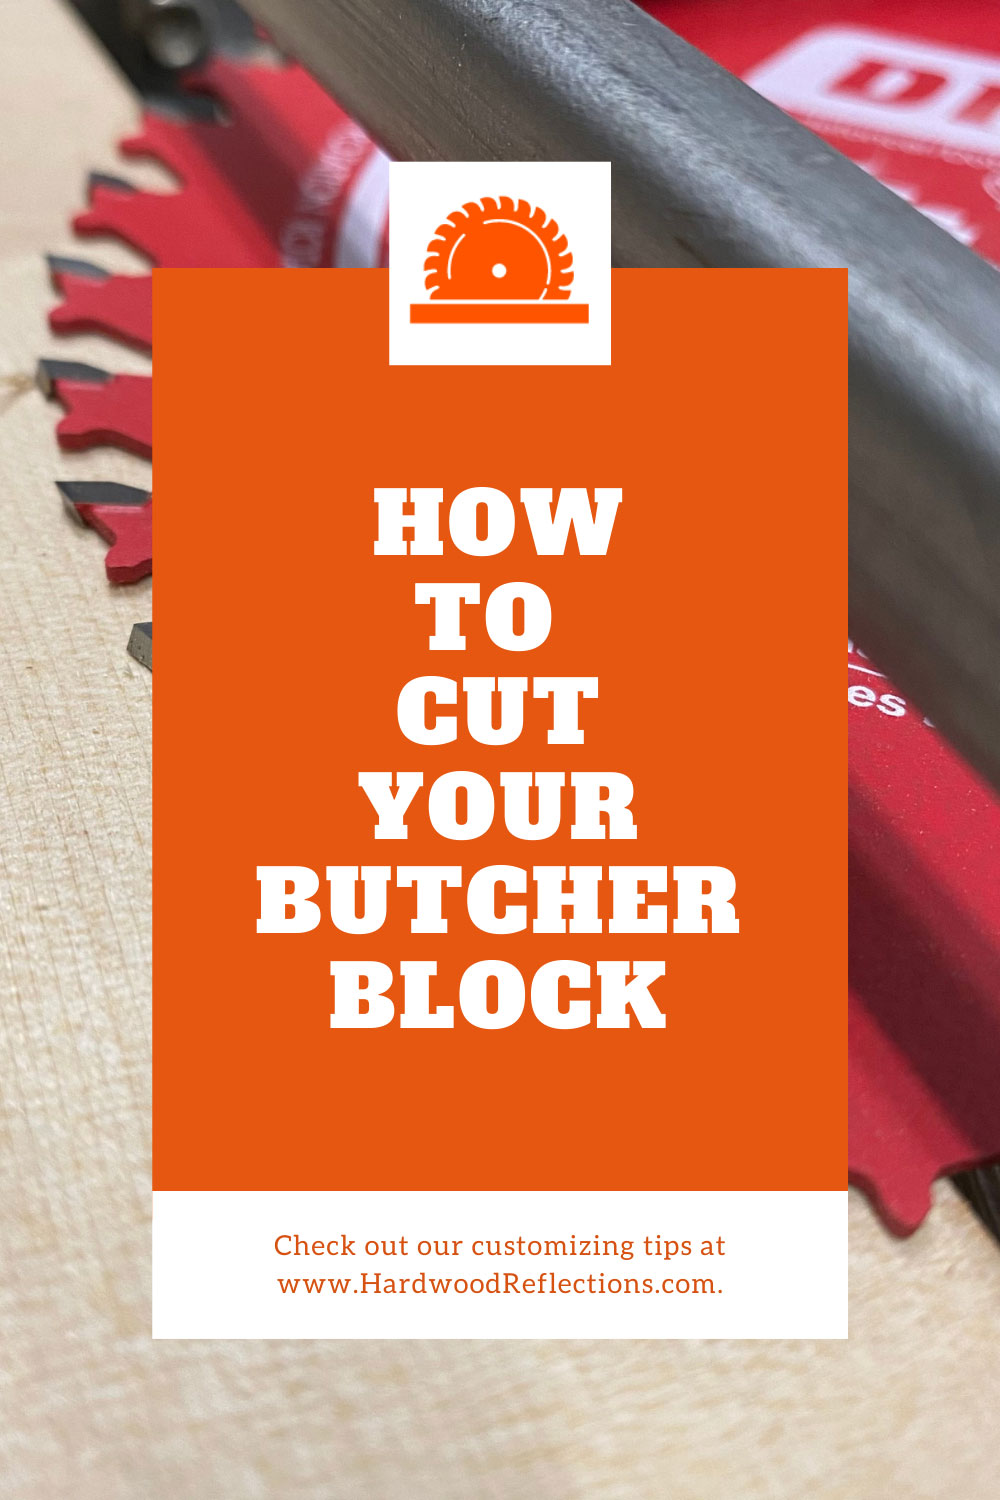 How to Cut Your Butcher Block